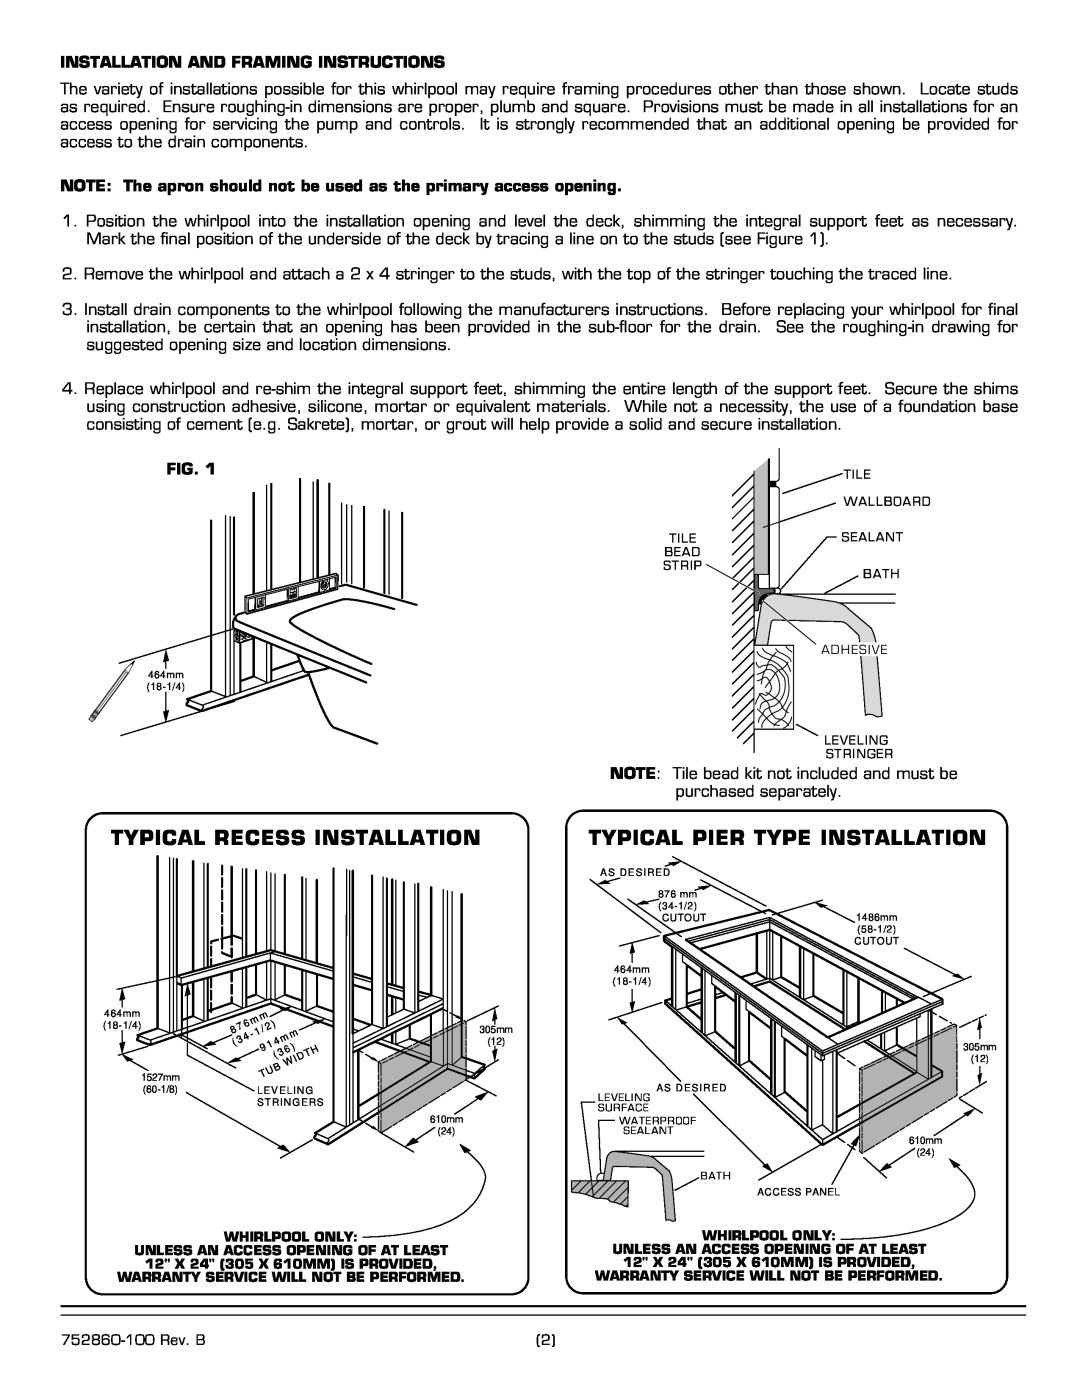 American Standard 2771E Typical Recess Installation, Typical Pier Type Installation, Installation And Framing Instructions 